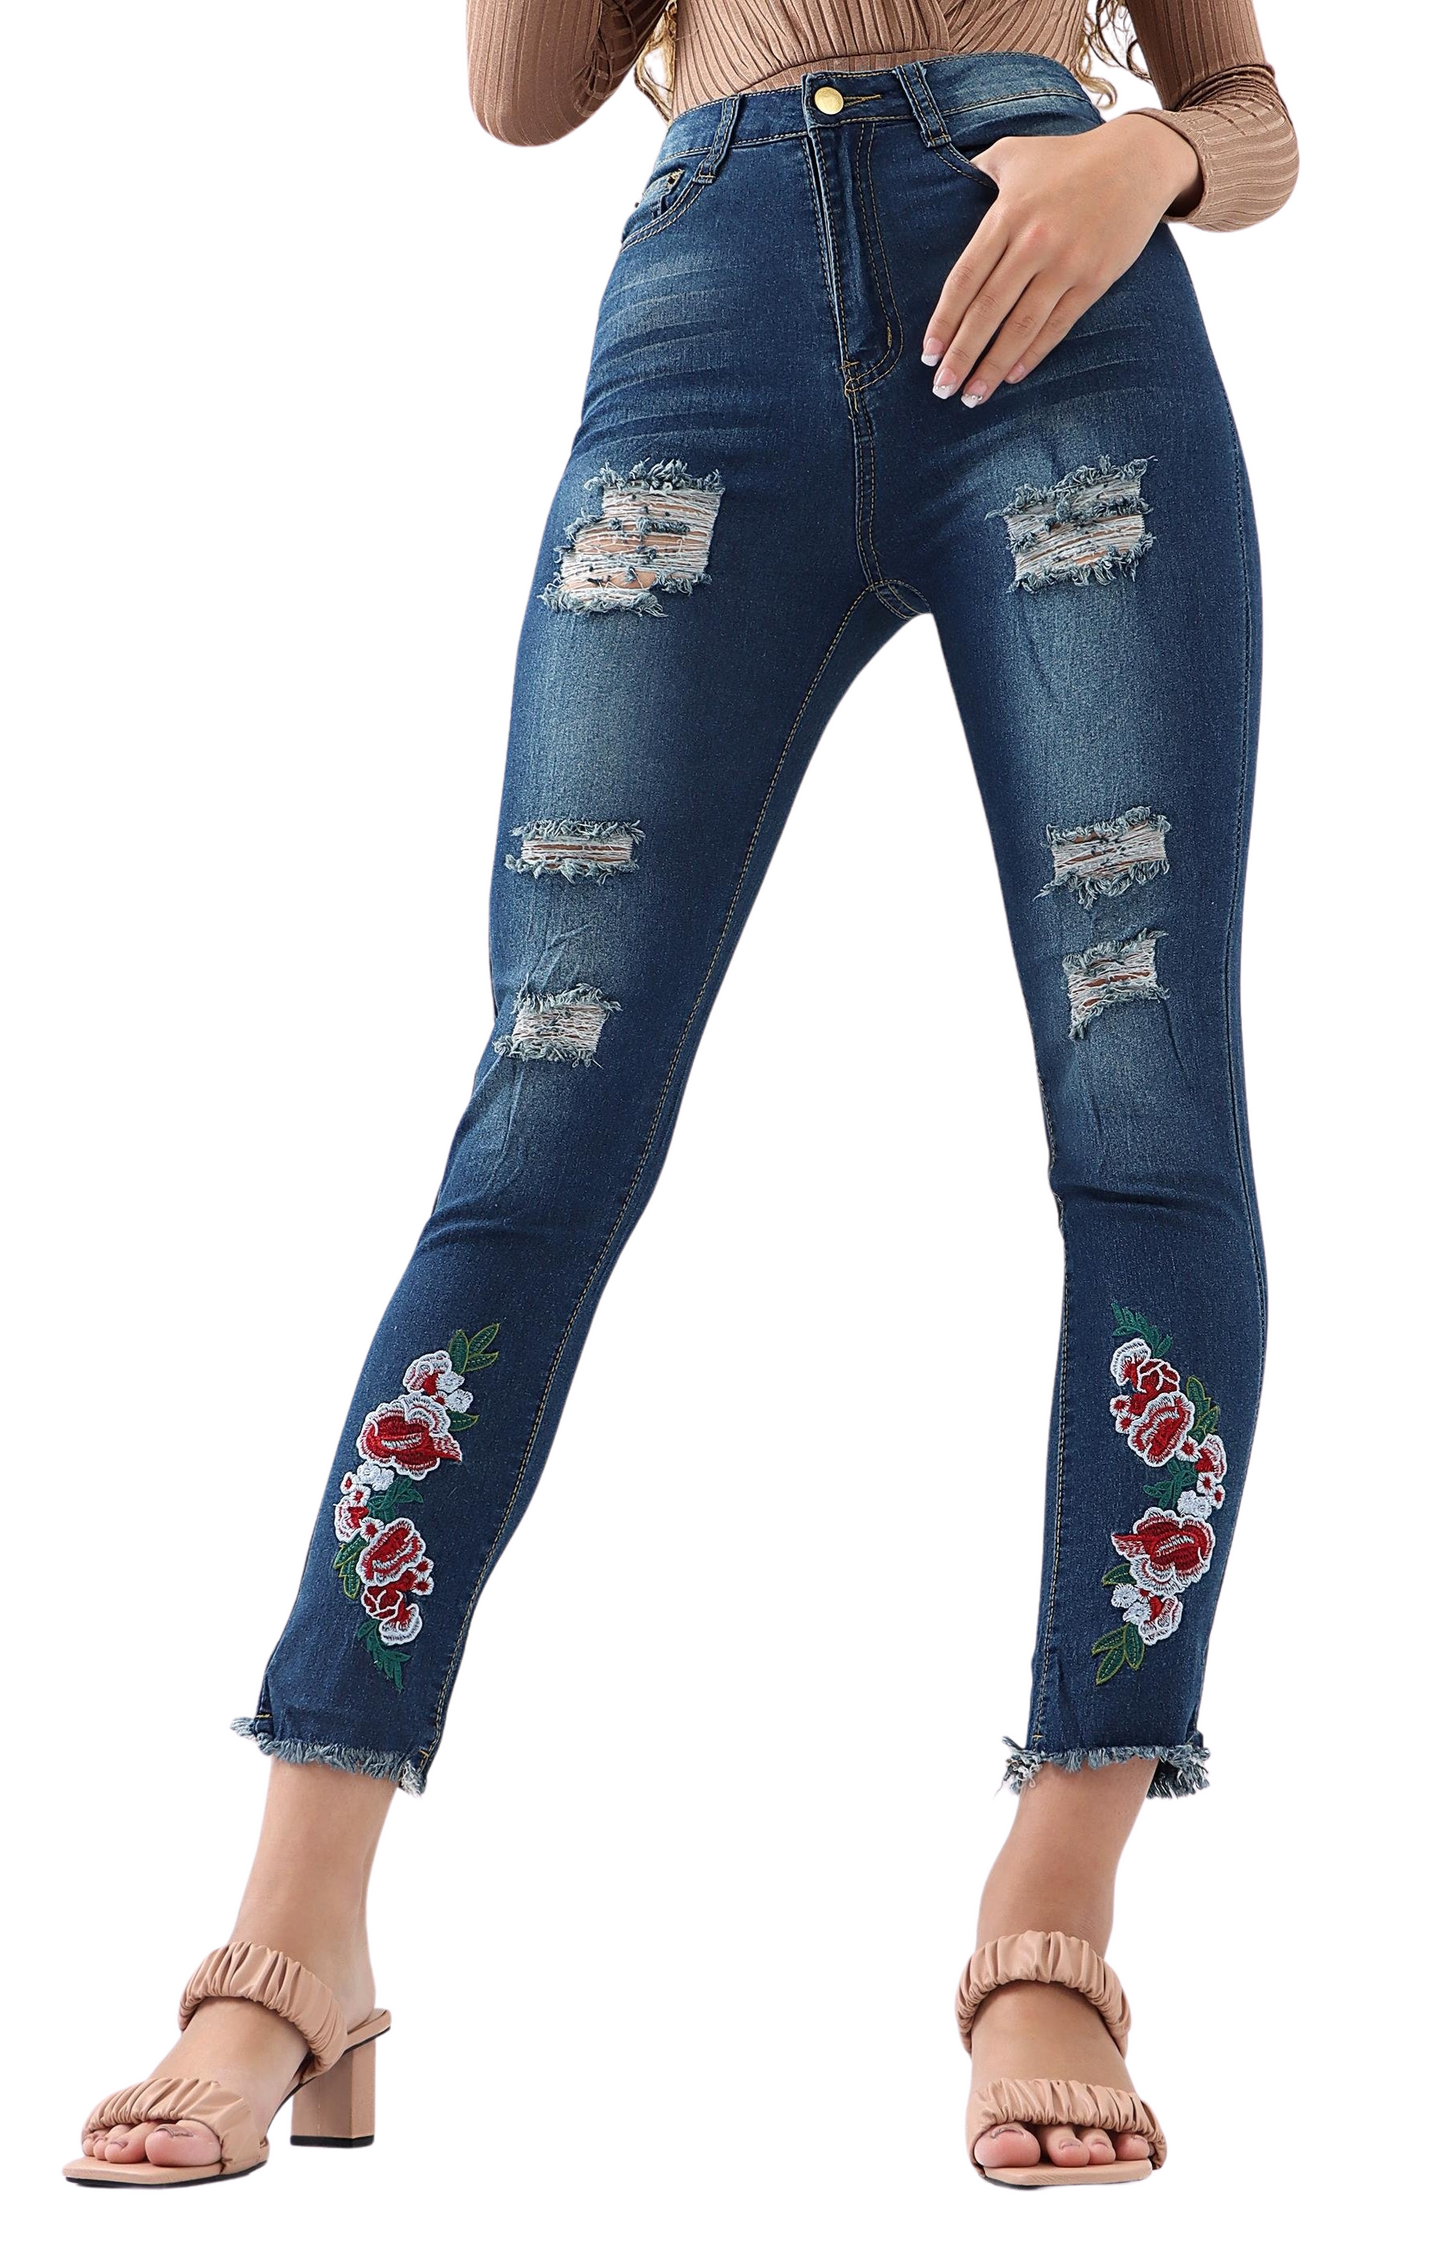 Ladies Ripped Jeans - Blue